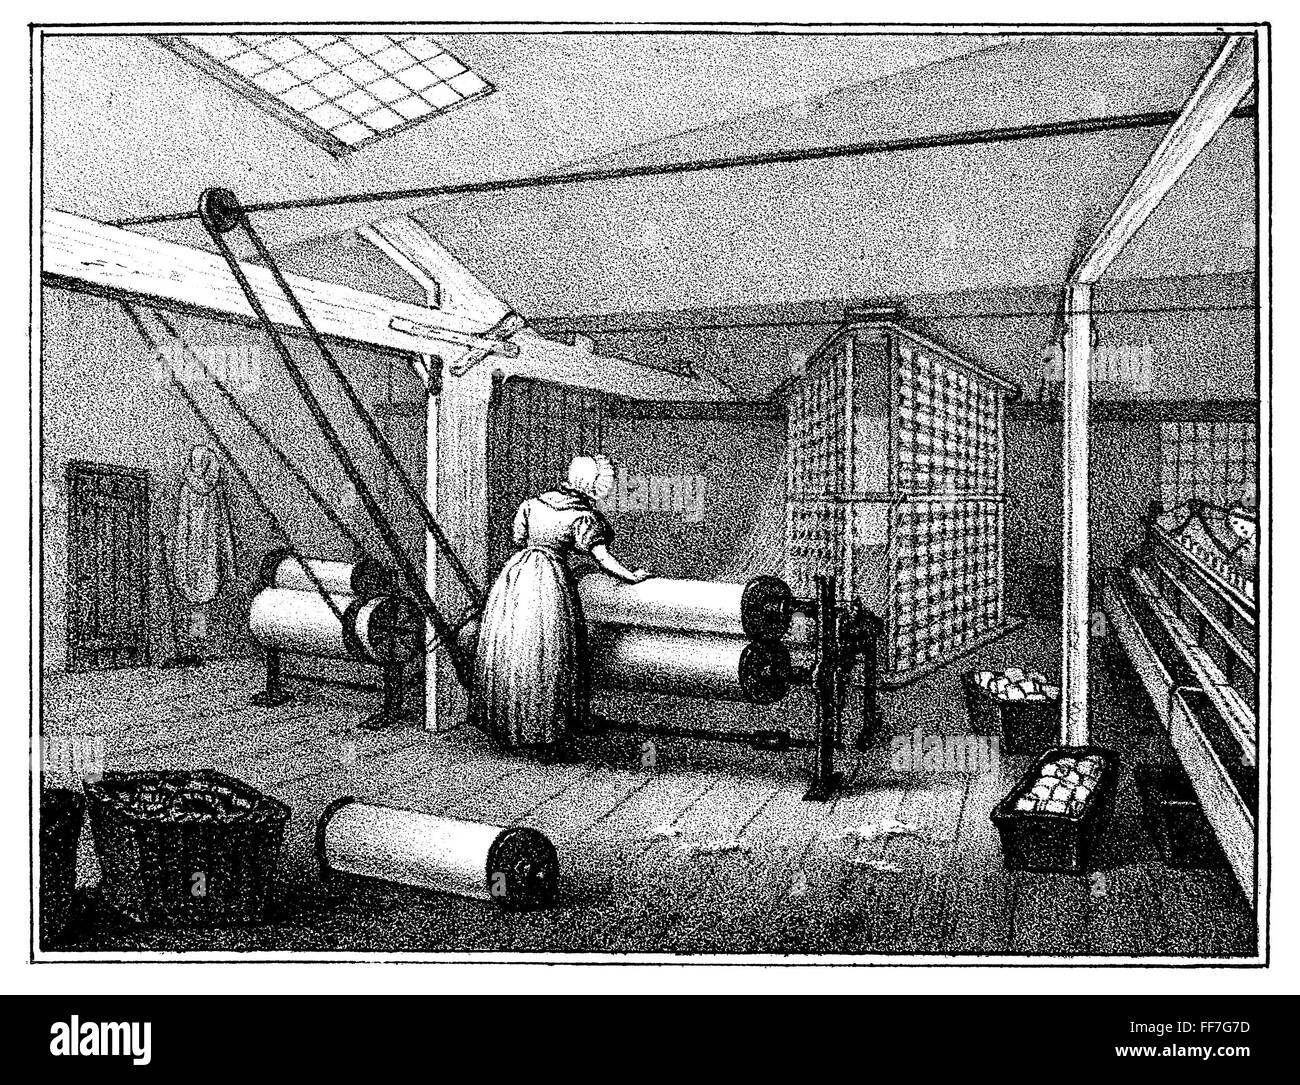 TEXTILE MANUFACTURE, 1840. /nWarping and winding. Interior view of a Manchester cotton manufactures mill. Stock Photo